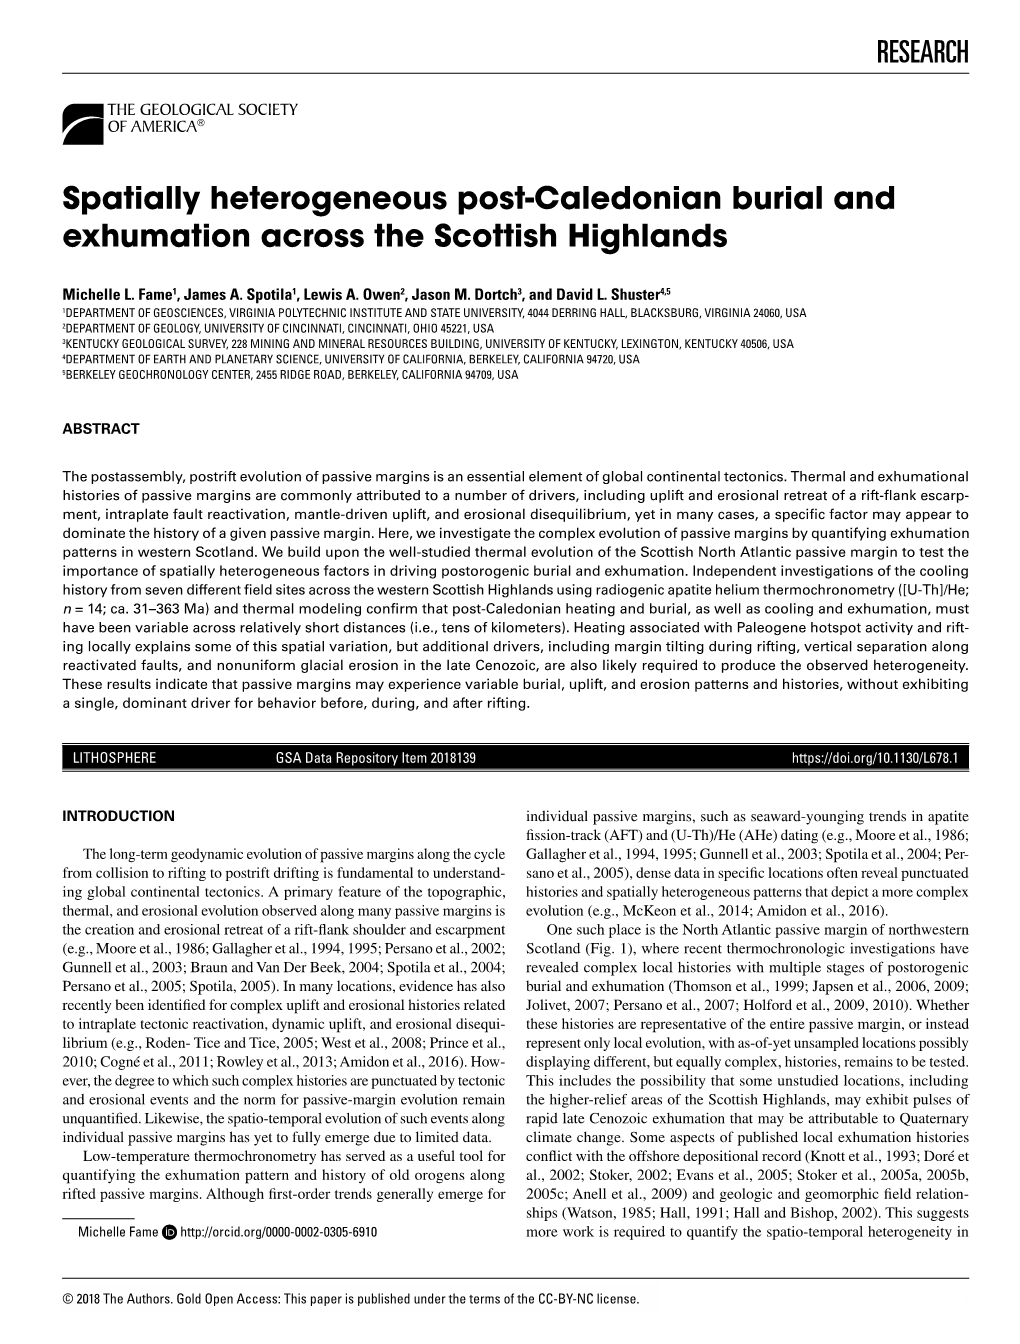 RESEARCH Spatially Heterogeneous Post-Caledonian Burial And